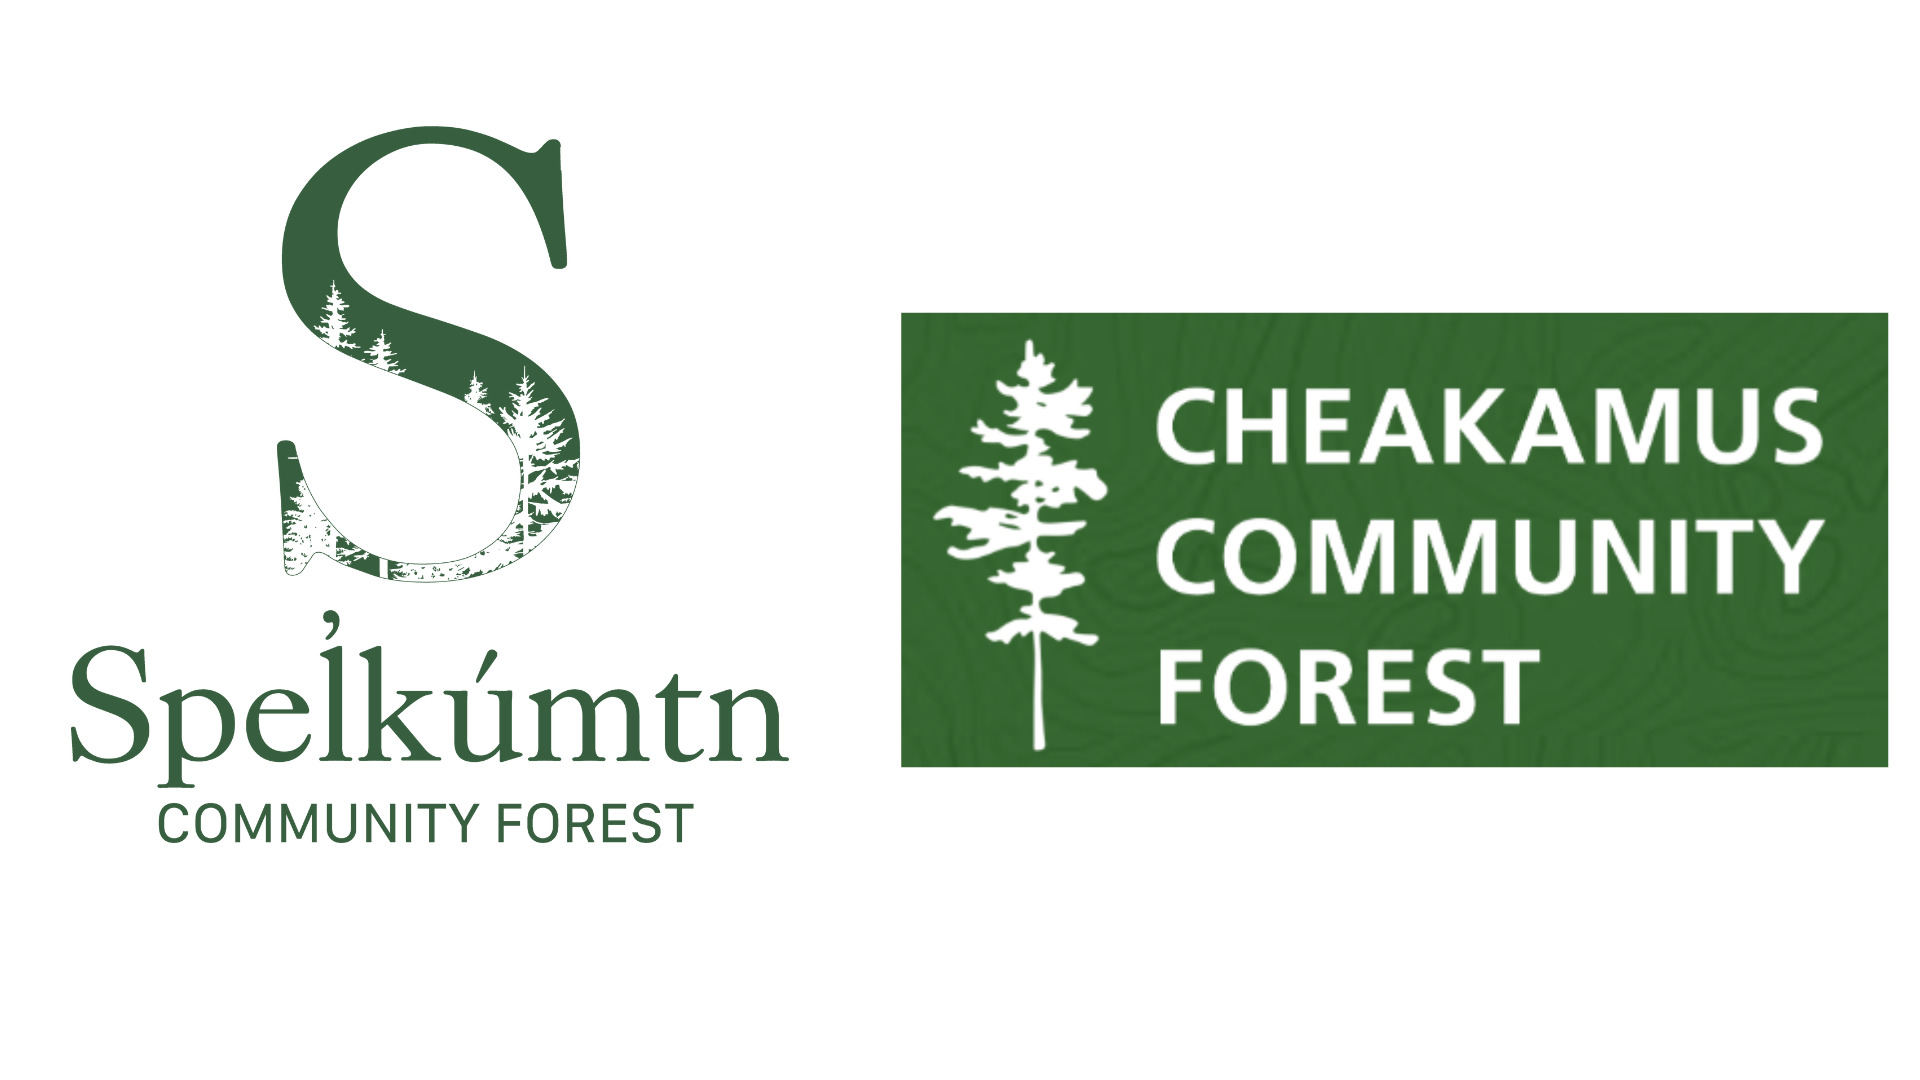 Logos for the Spel'kúmtn and Cheakamus Community Forests